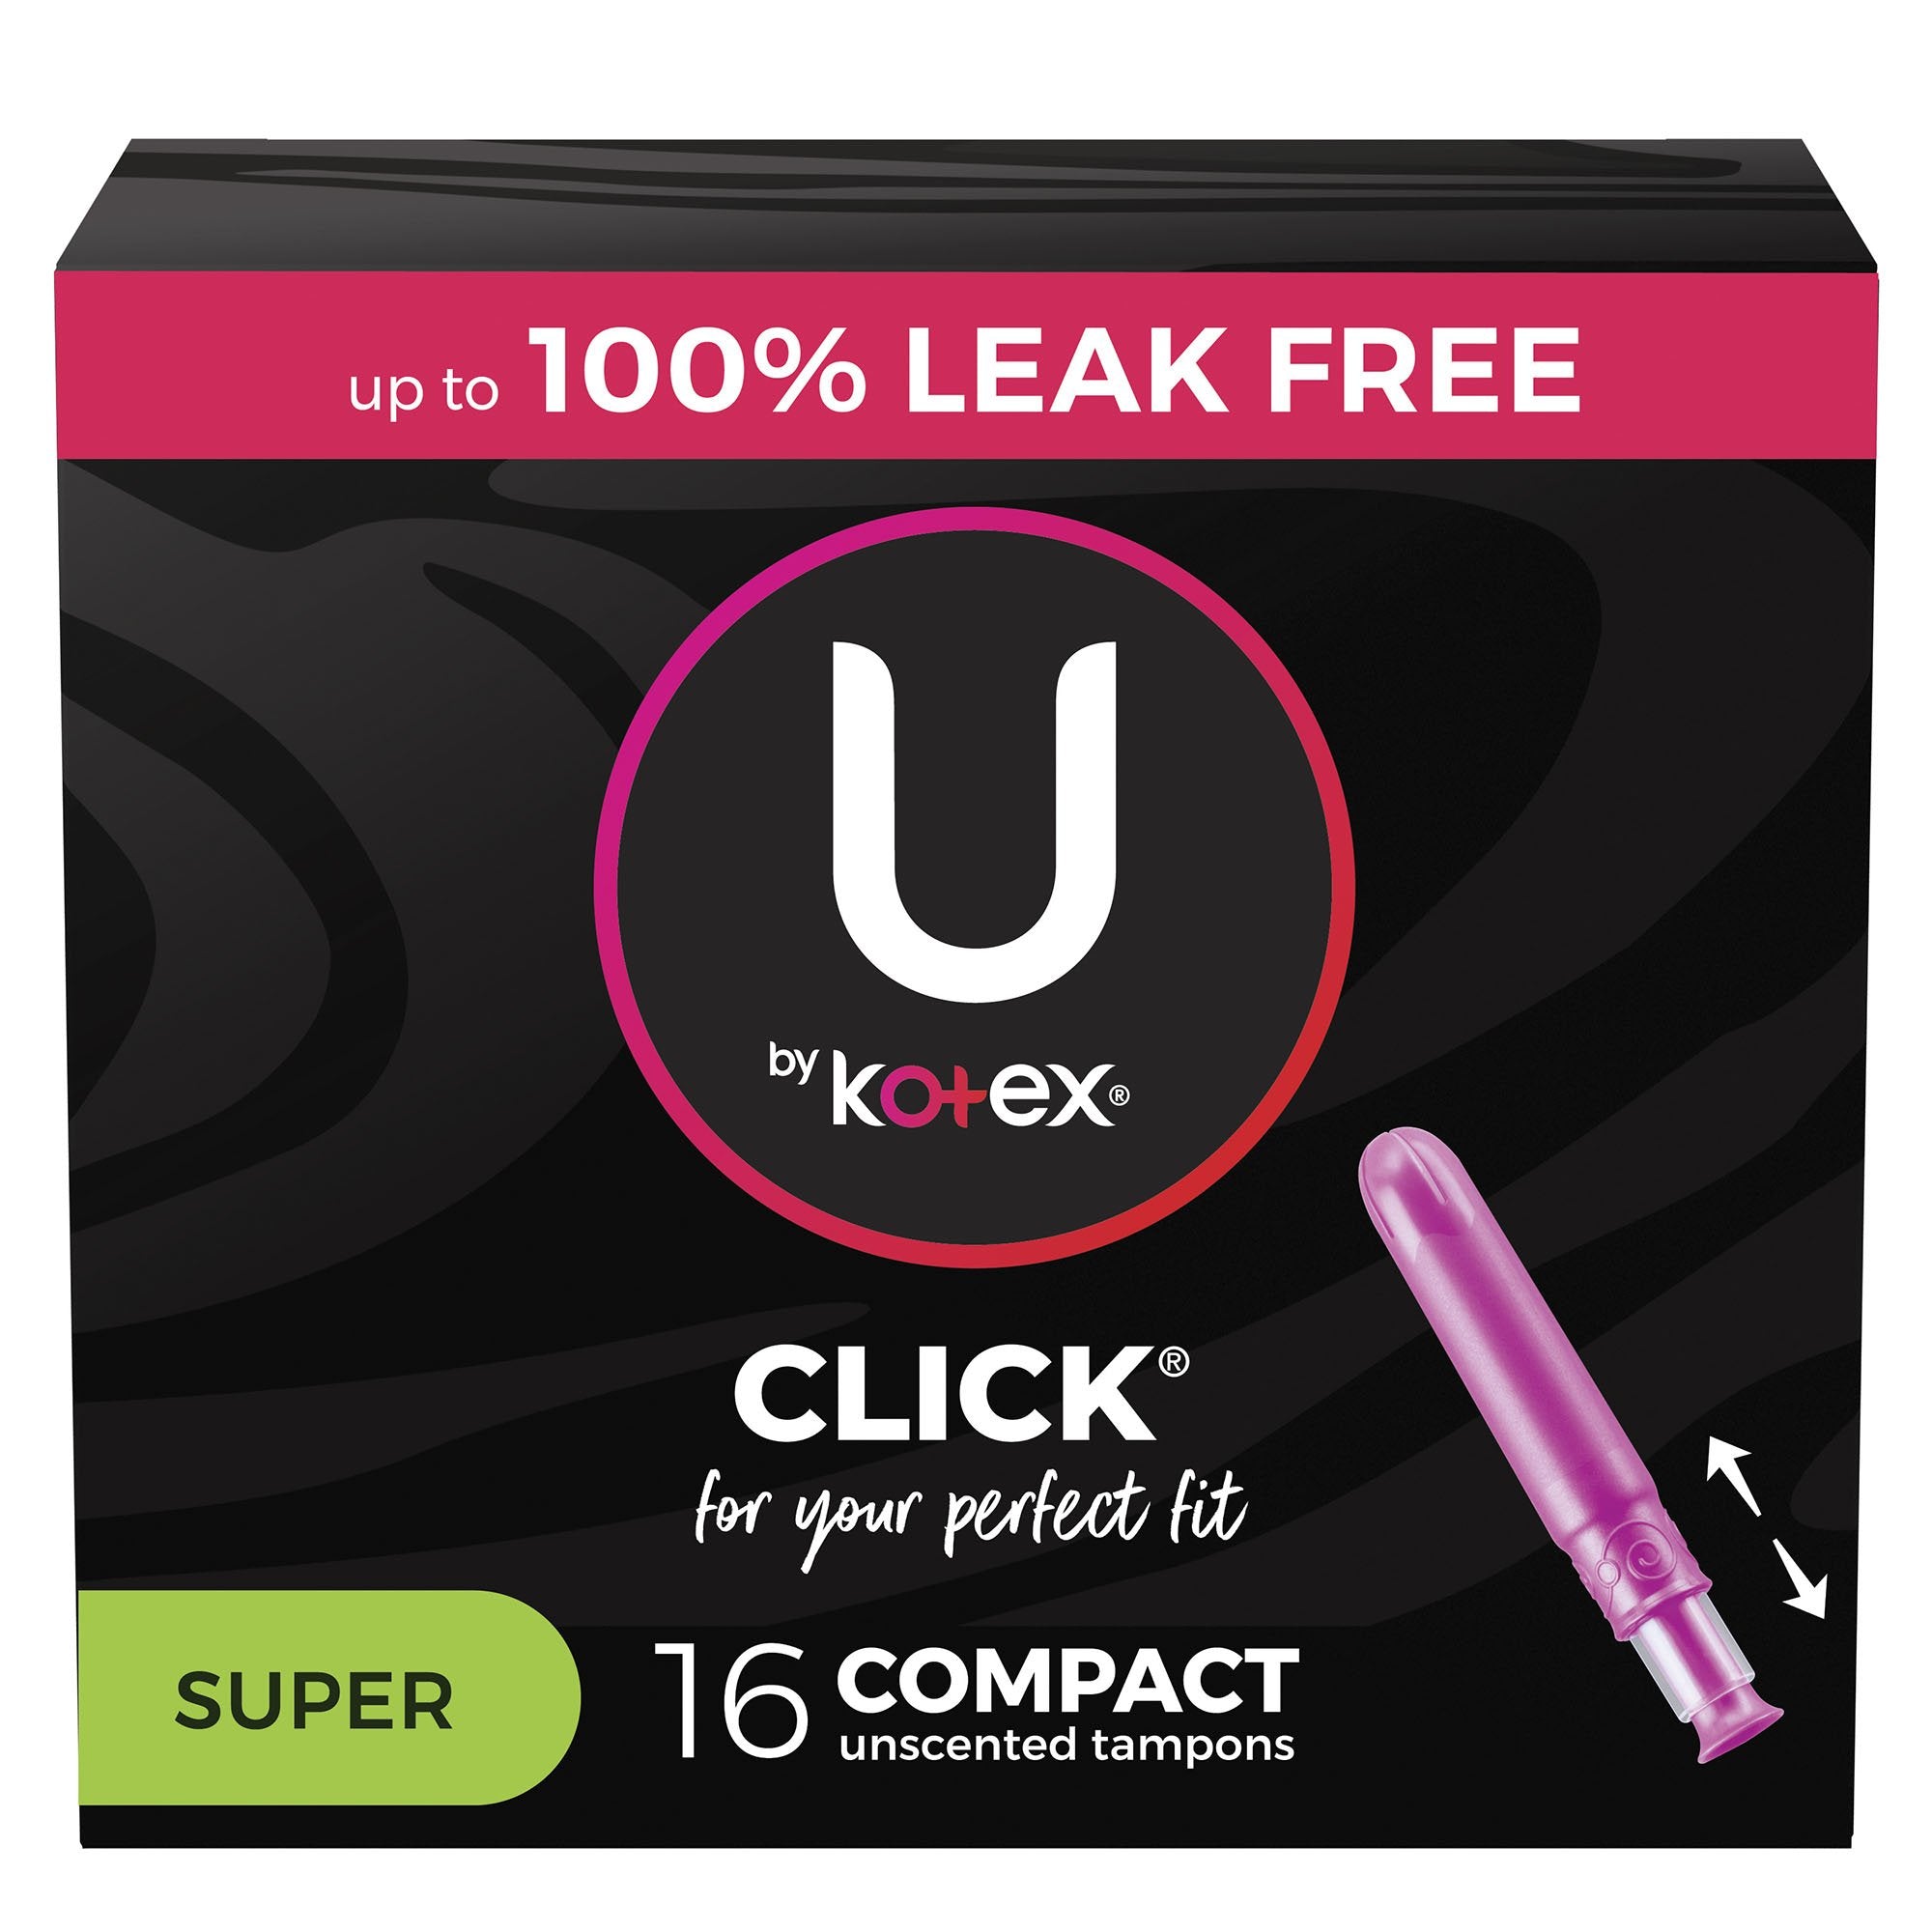 Tampon U by Kotex Click Super Absorbency Plastic Applicator Individually Wrapped